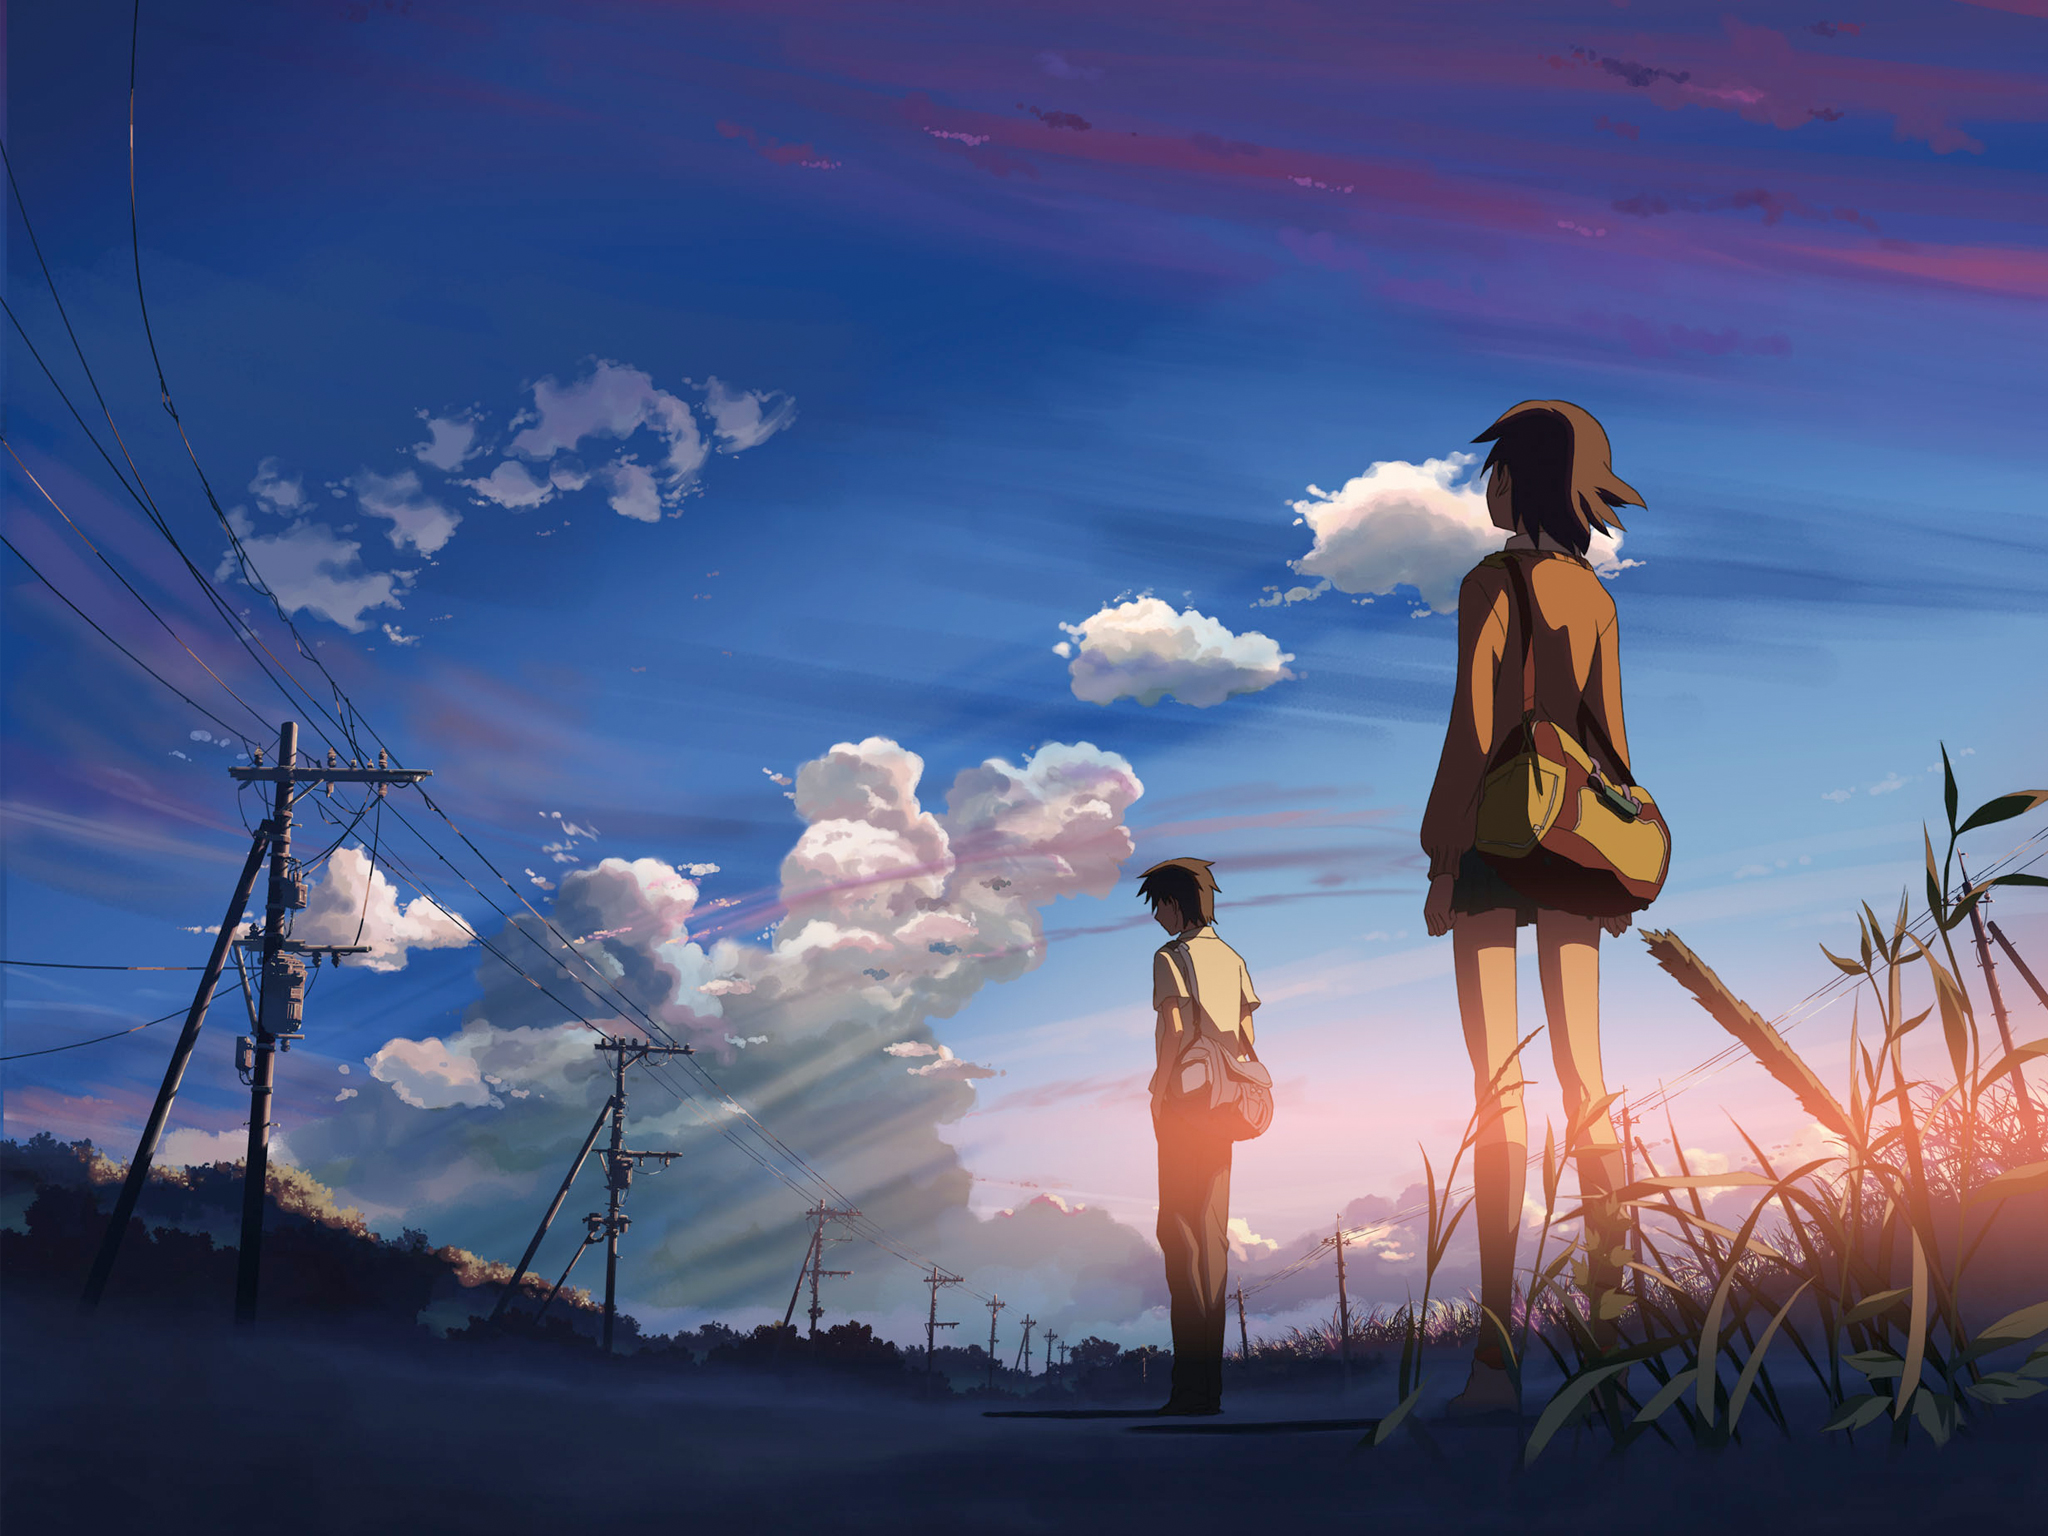 Takaki and Kanae, characters from the anime 5 Centimeters Per Second, in a scenic wallpaper.